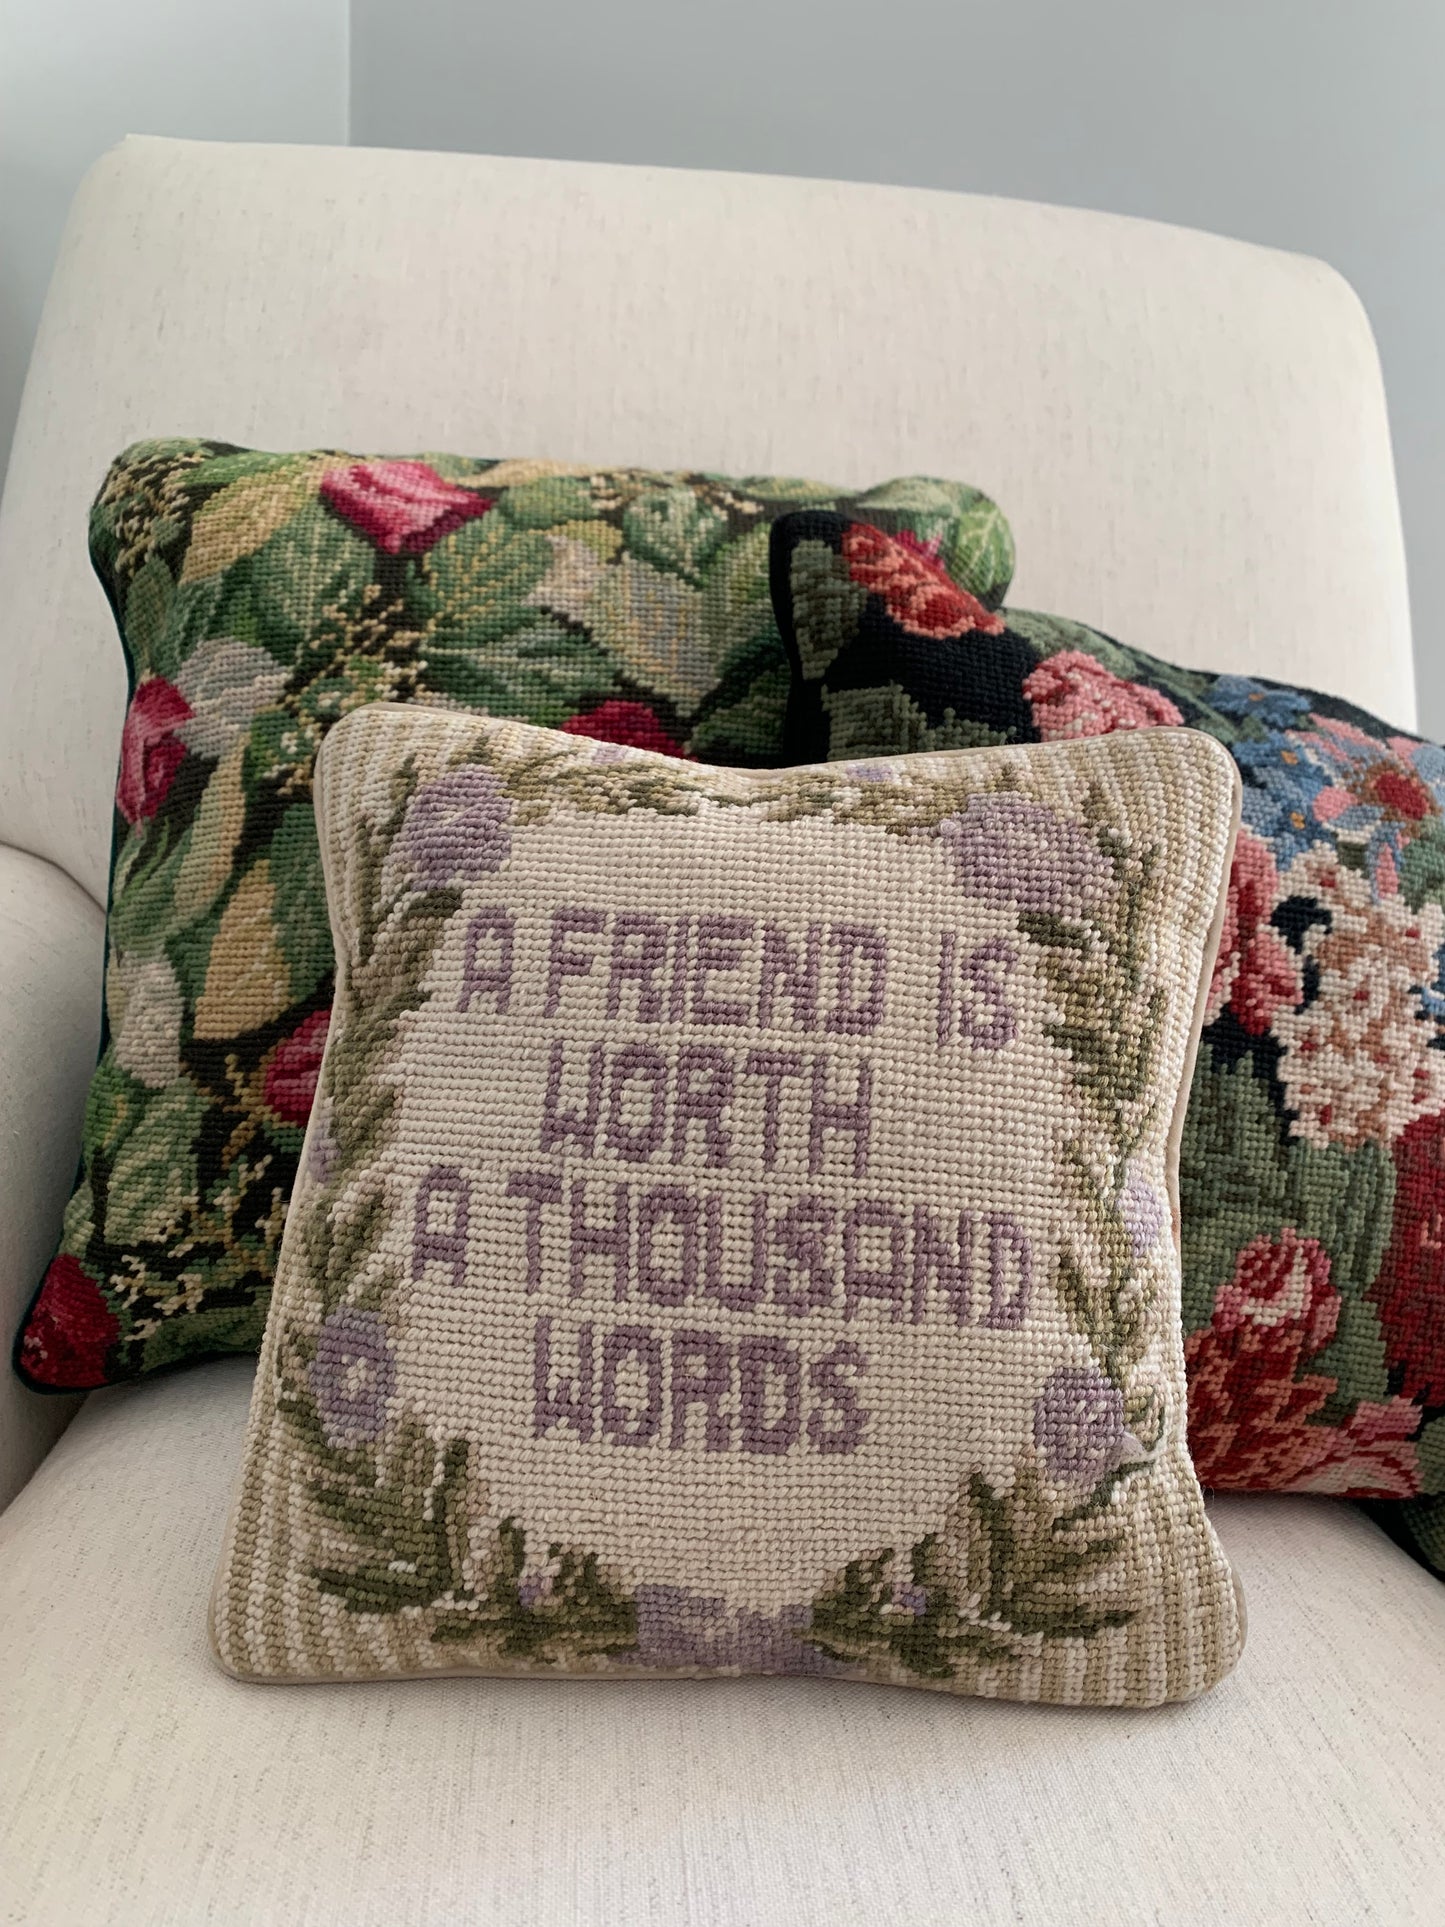 "A Friend is Worth a Thousand Words" Needlepoint Pillow